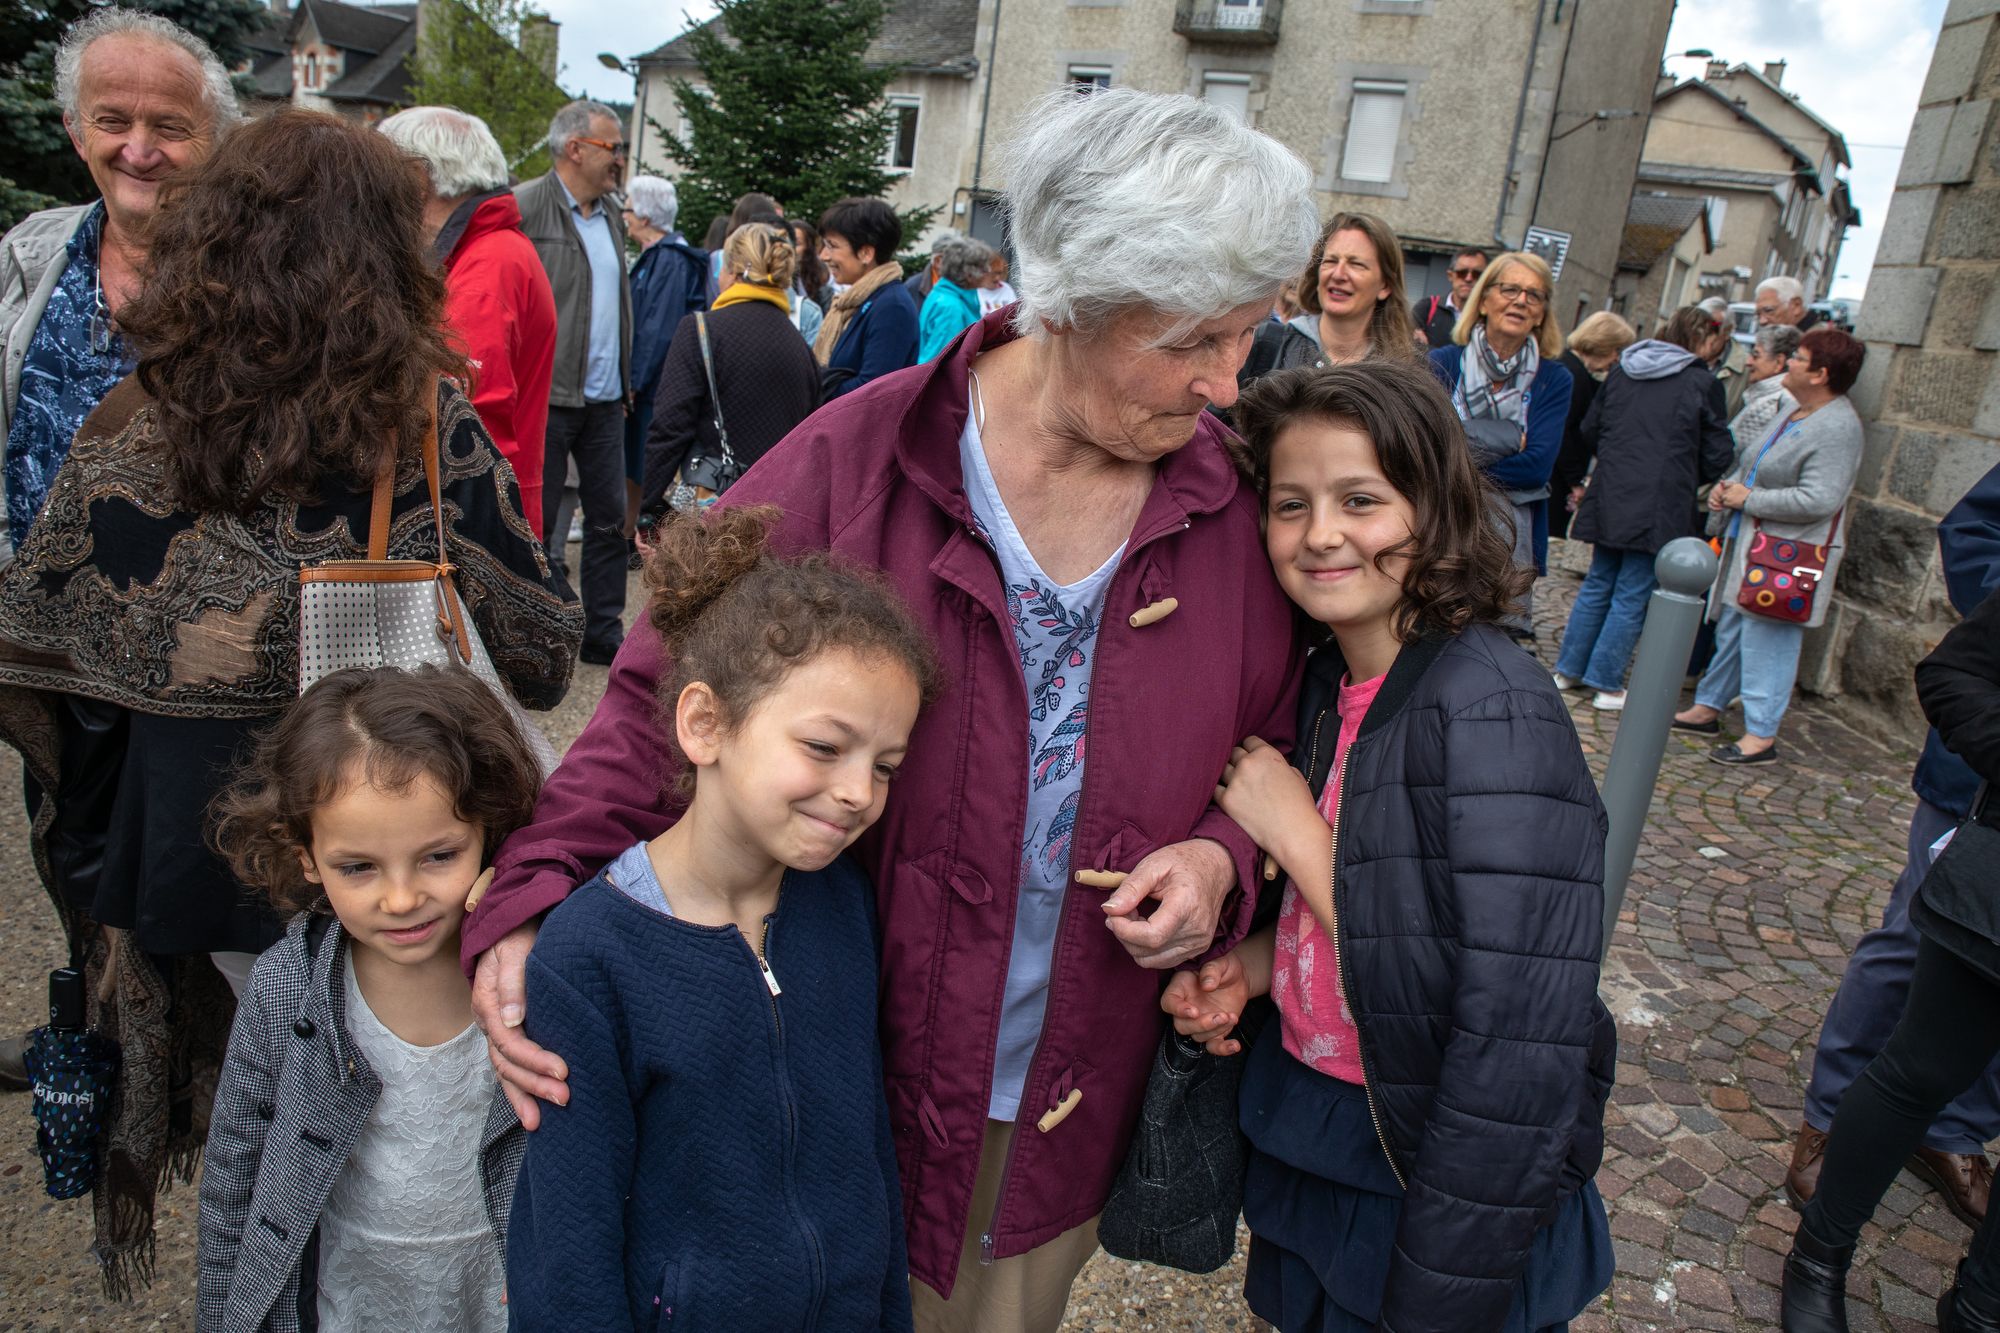 Michelle Baillot brings Touana (5), Schkourtessa (7) and Erlina Sélimi (10) to France’s World War II Victory Day at Le Chambon-sur-Lignon’s town’s square.  The girls are from a Kosovar refugee family that Baillot has been close to now for ten years. “I tell them that you are not from here, so you are going to have to be better than everyone else.” Image by Lucian Perkins. France, 2018.